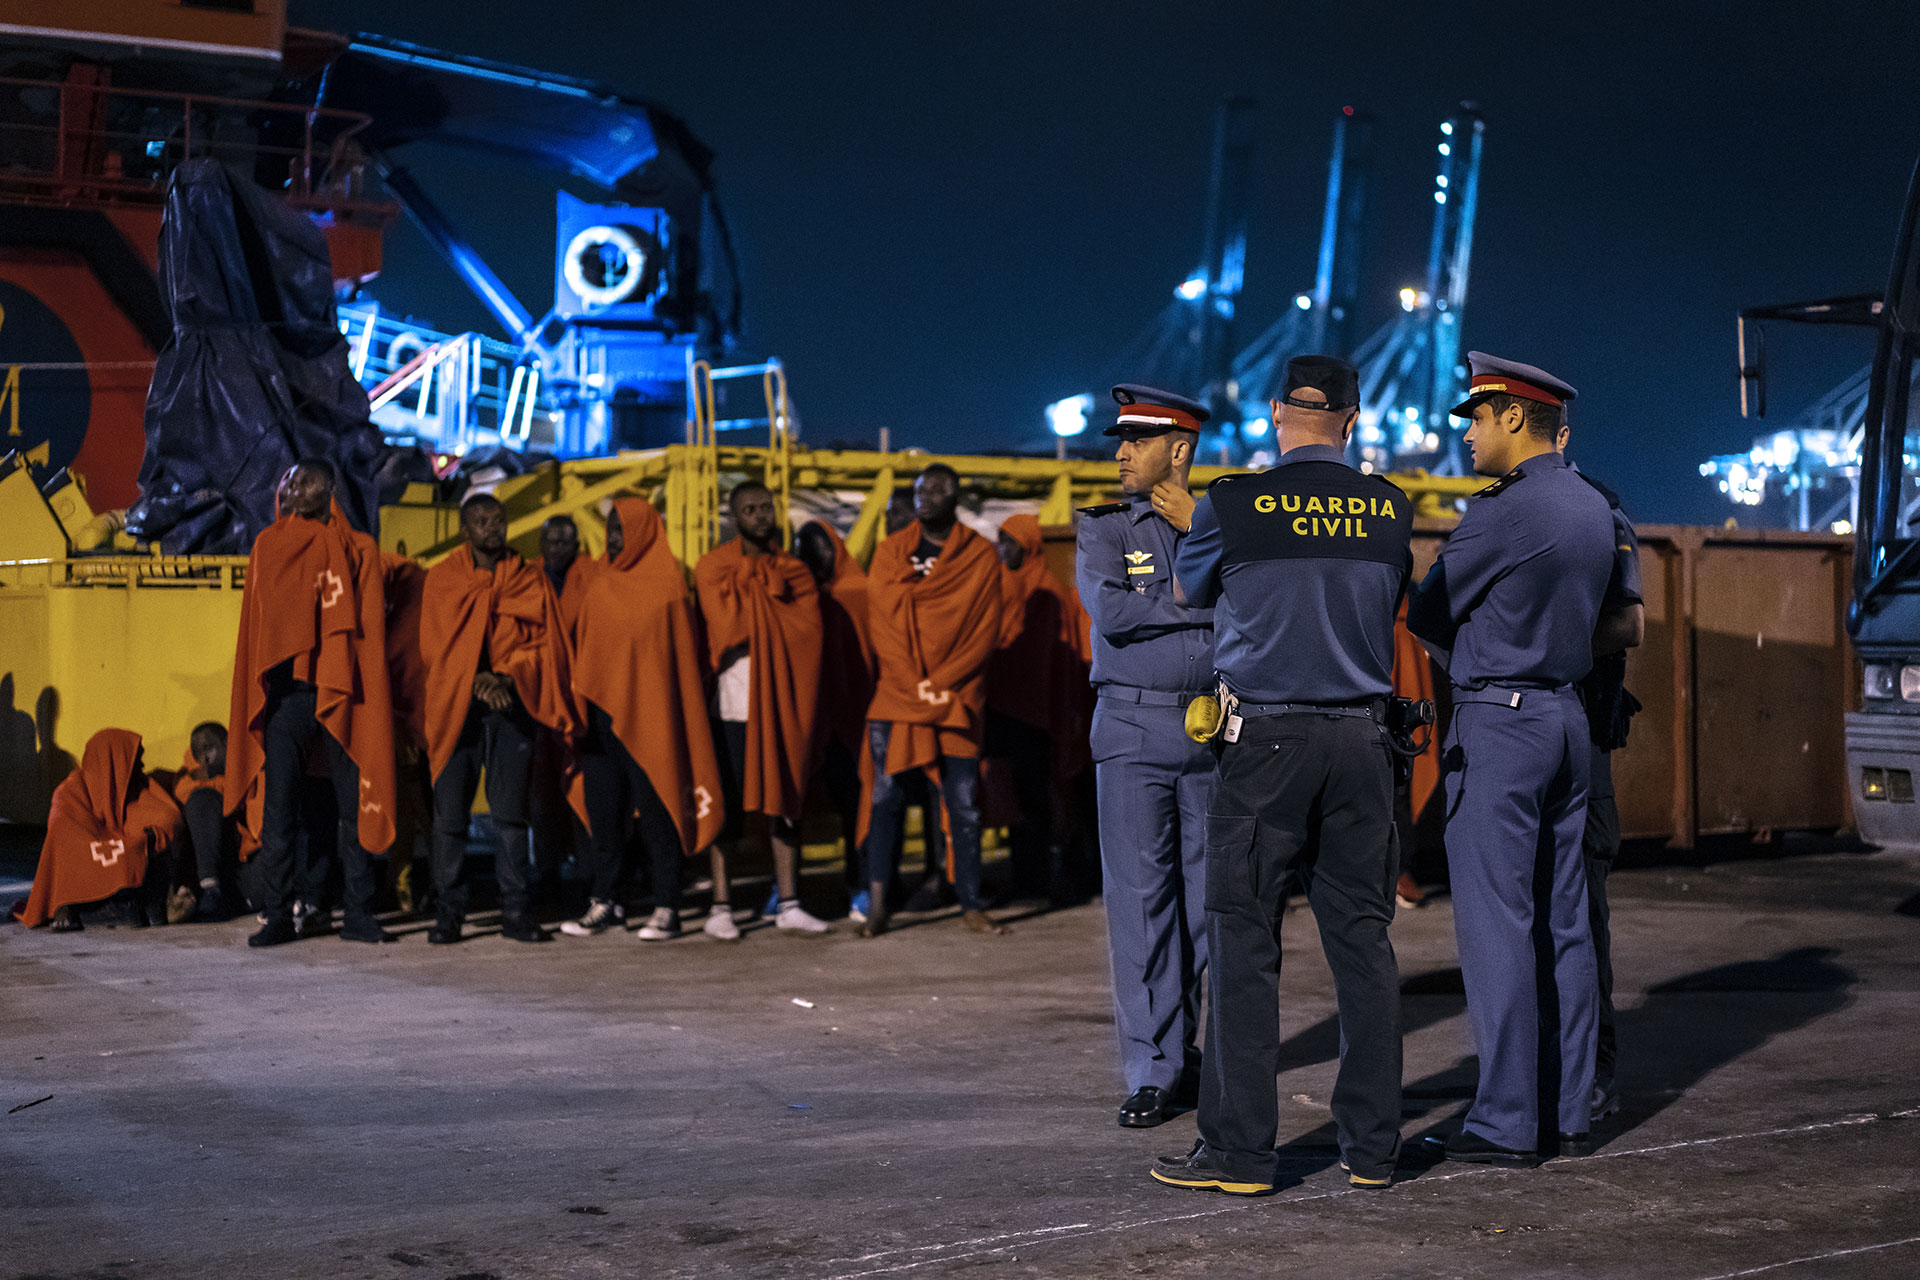 Some of the people who were intercepted by a Maritime Rescue ship while trying to reach the coast aboard a small boy, wait in the port of Algeciras near a joint patrol of the Moroccan Civil Guard and Gendarmerie, July 21, 2019.